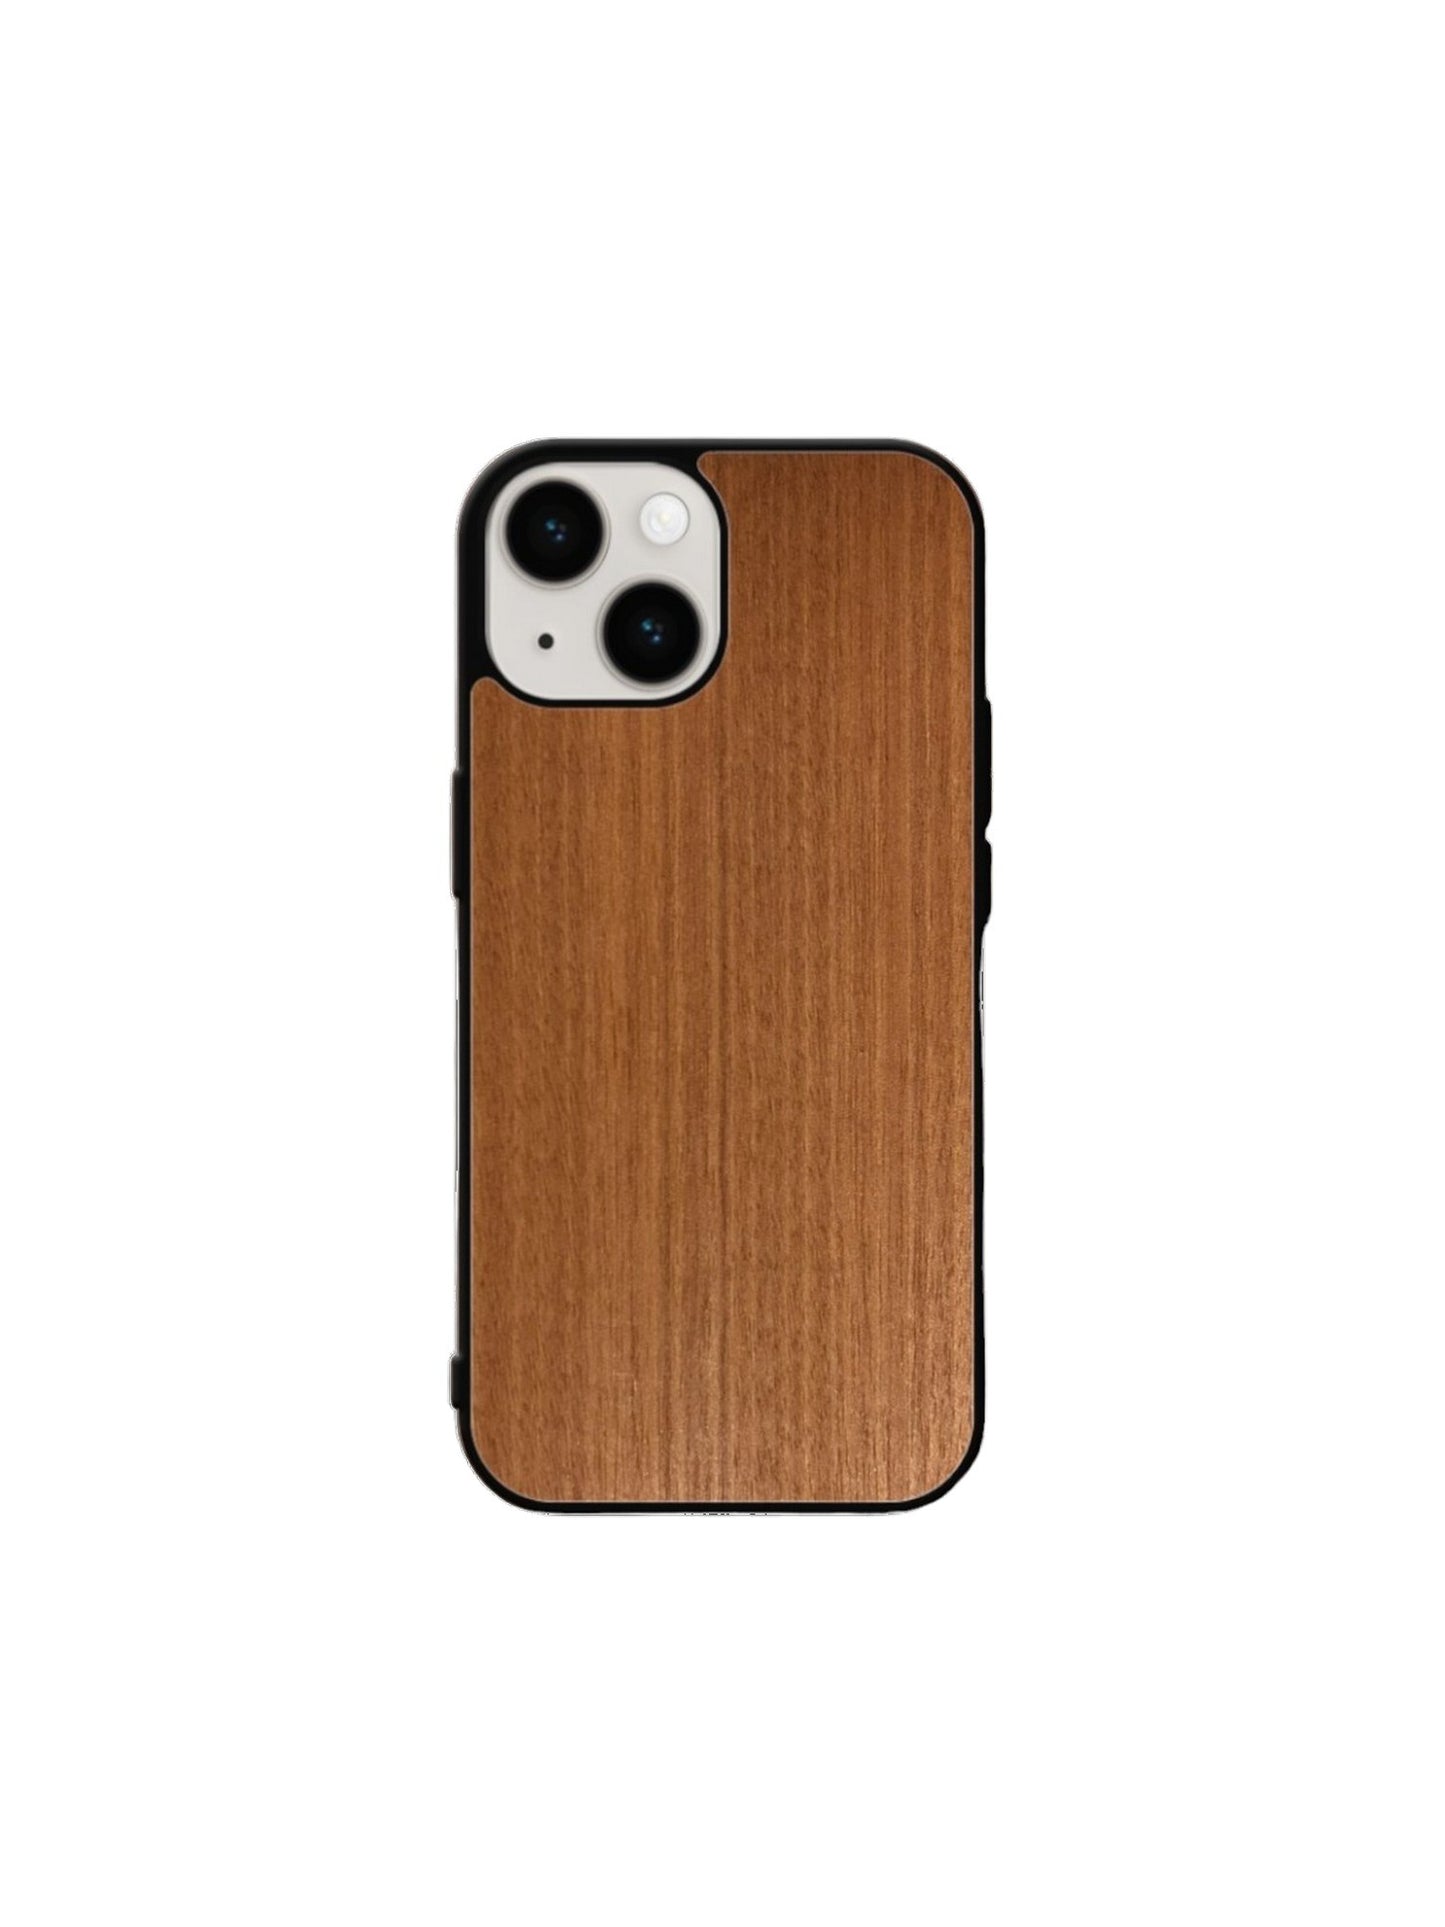 Iphone case - The simple